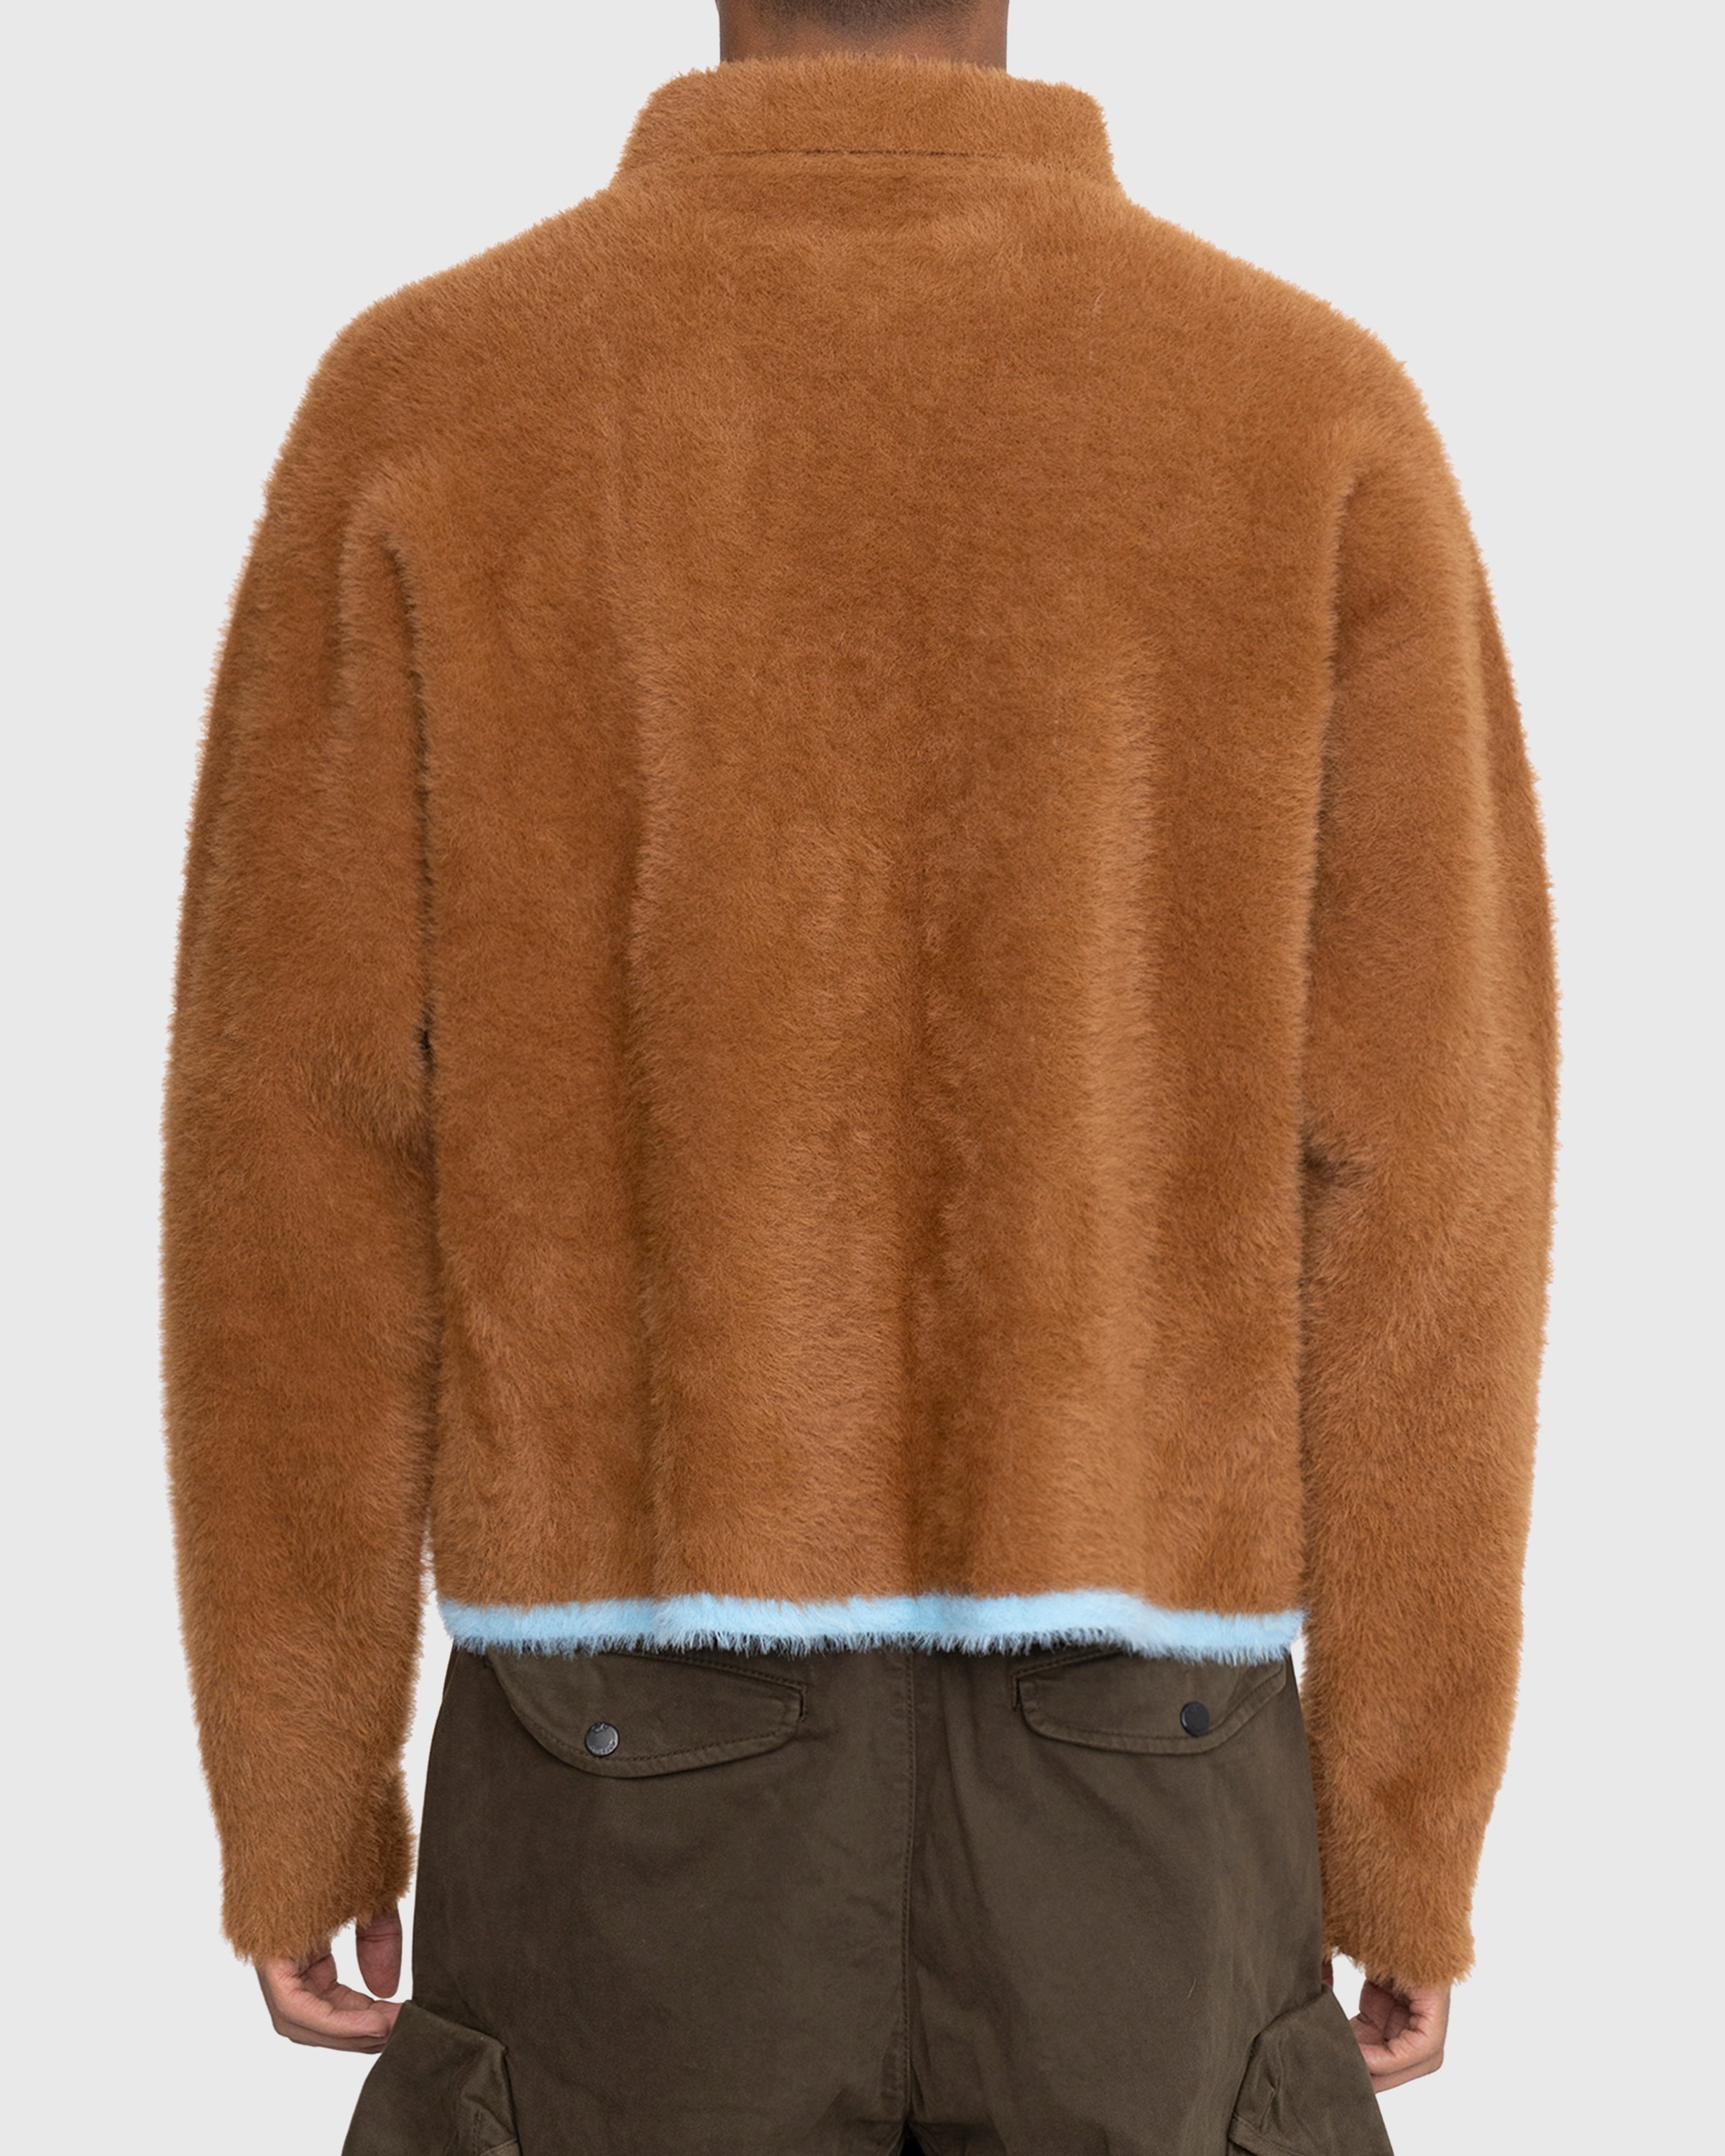 JACQUEMUS – Le Polo Neve Brown - Knitwear - Brown - Image 3